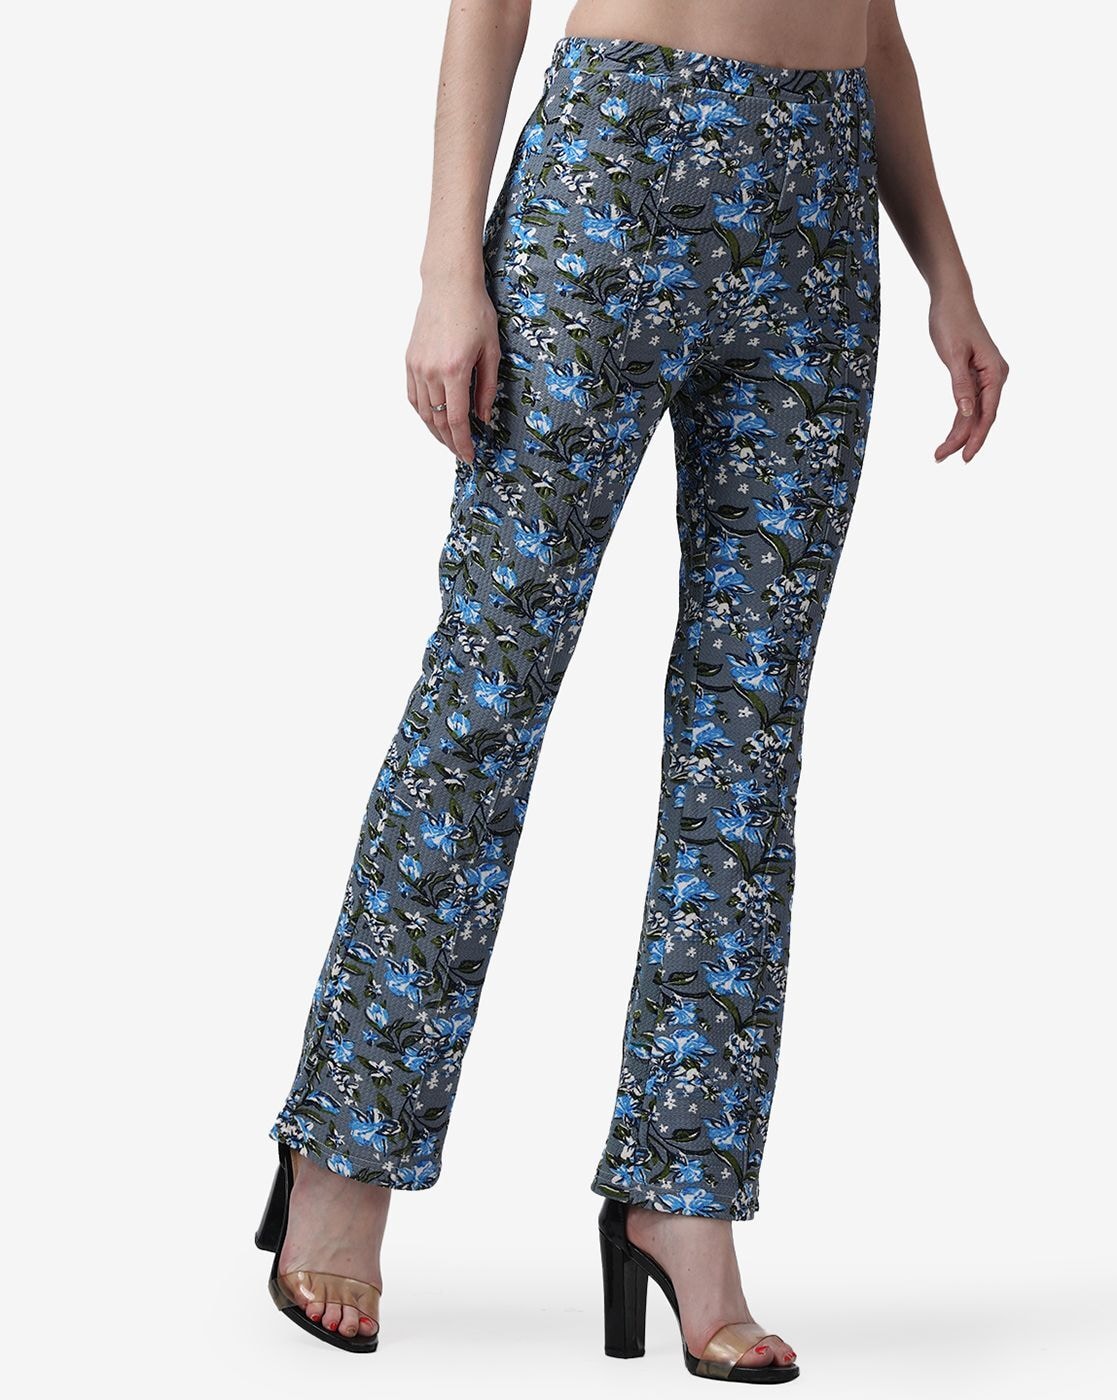 Bootcut Trousers with Flat Front